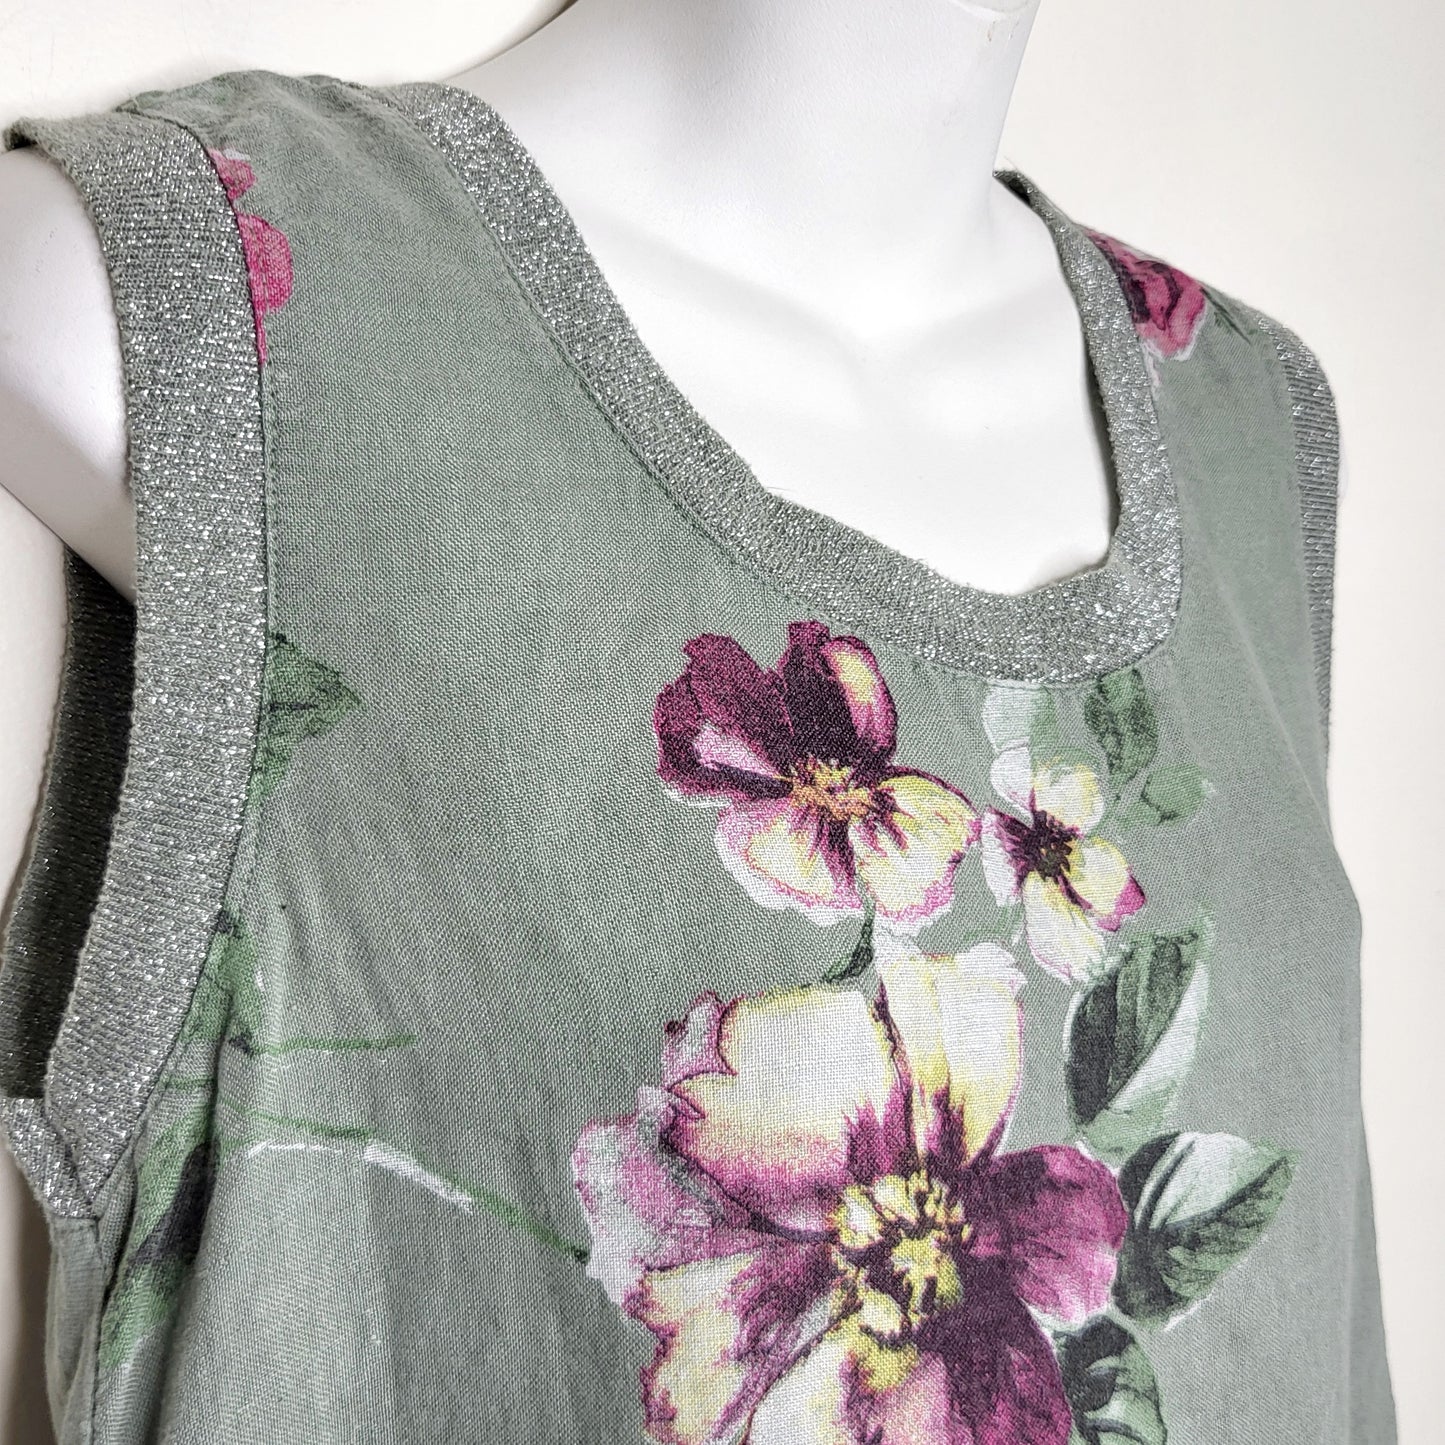 PMOR1 - M Made in Italy green floral print linen sleeveless top, size small, good condition